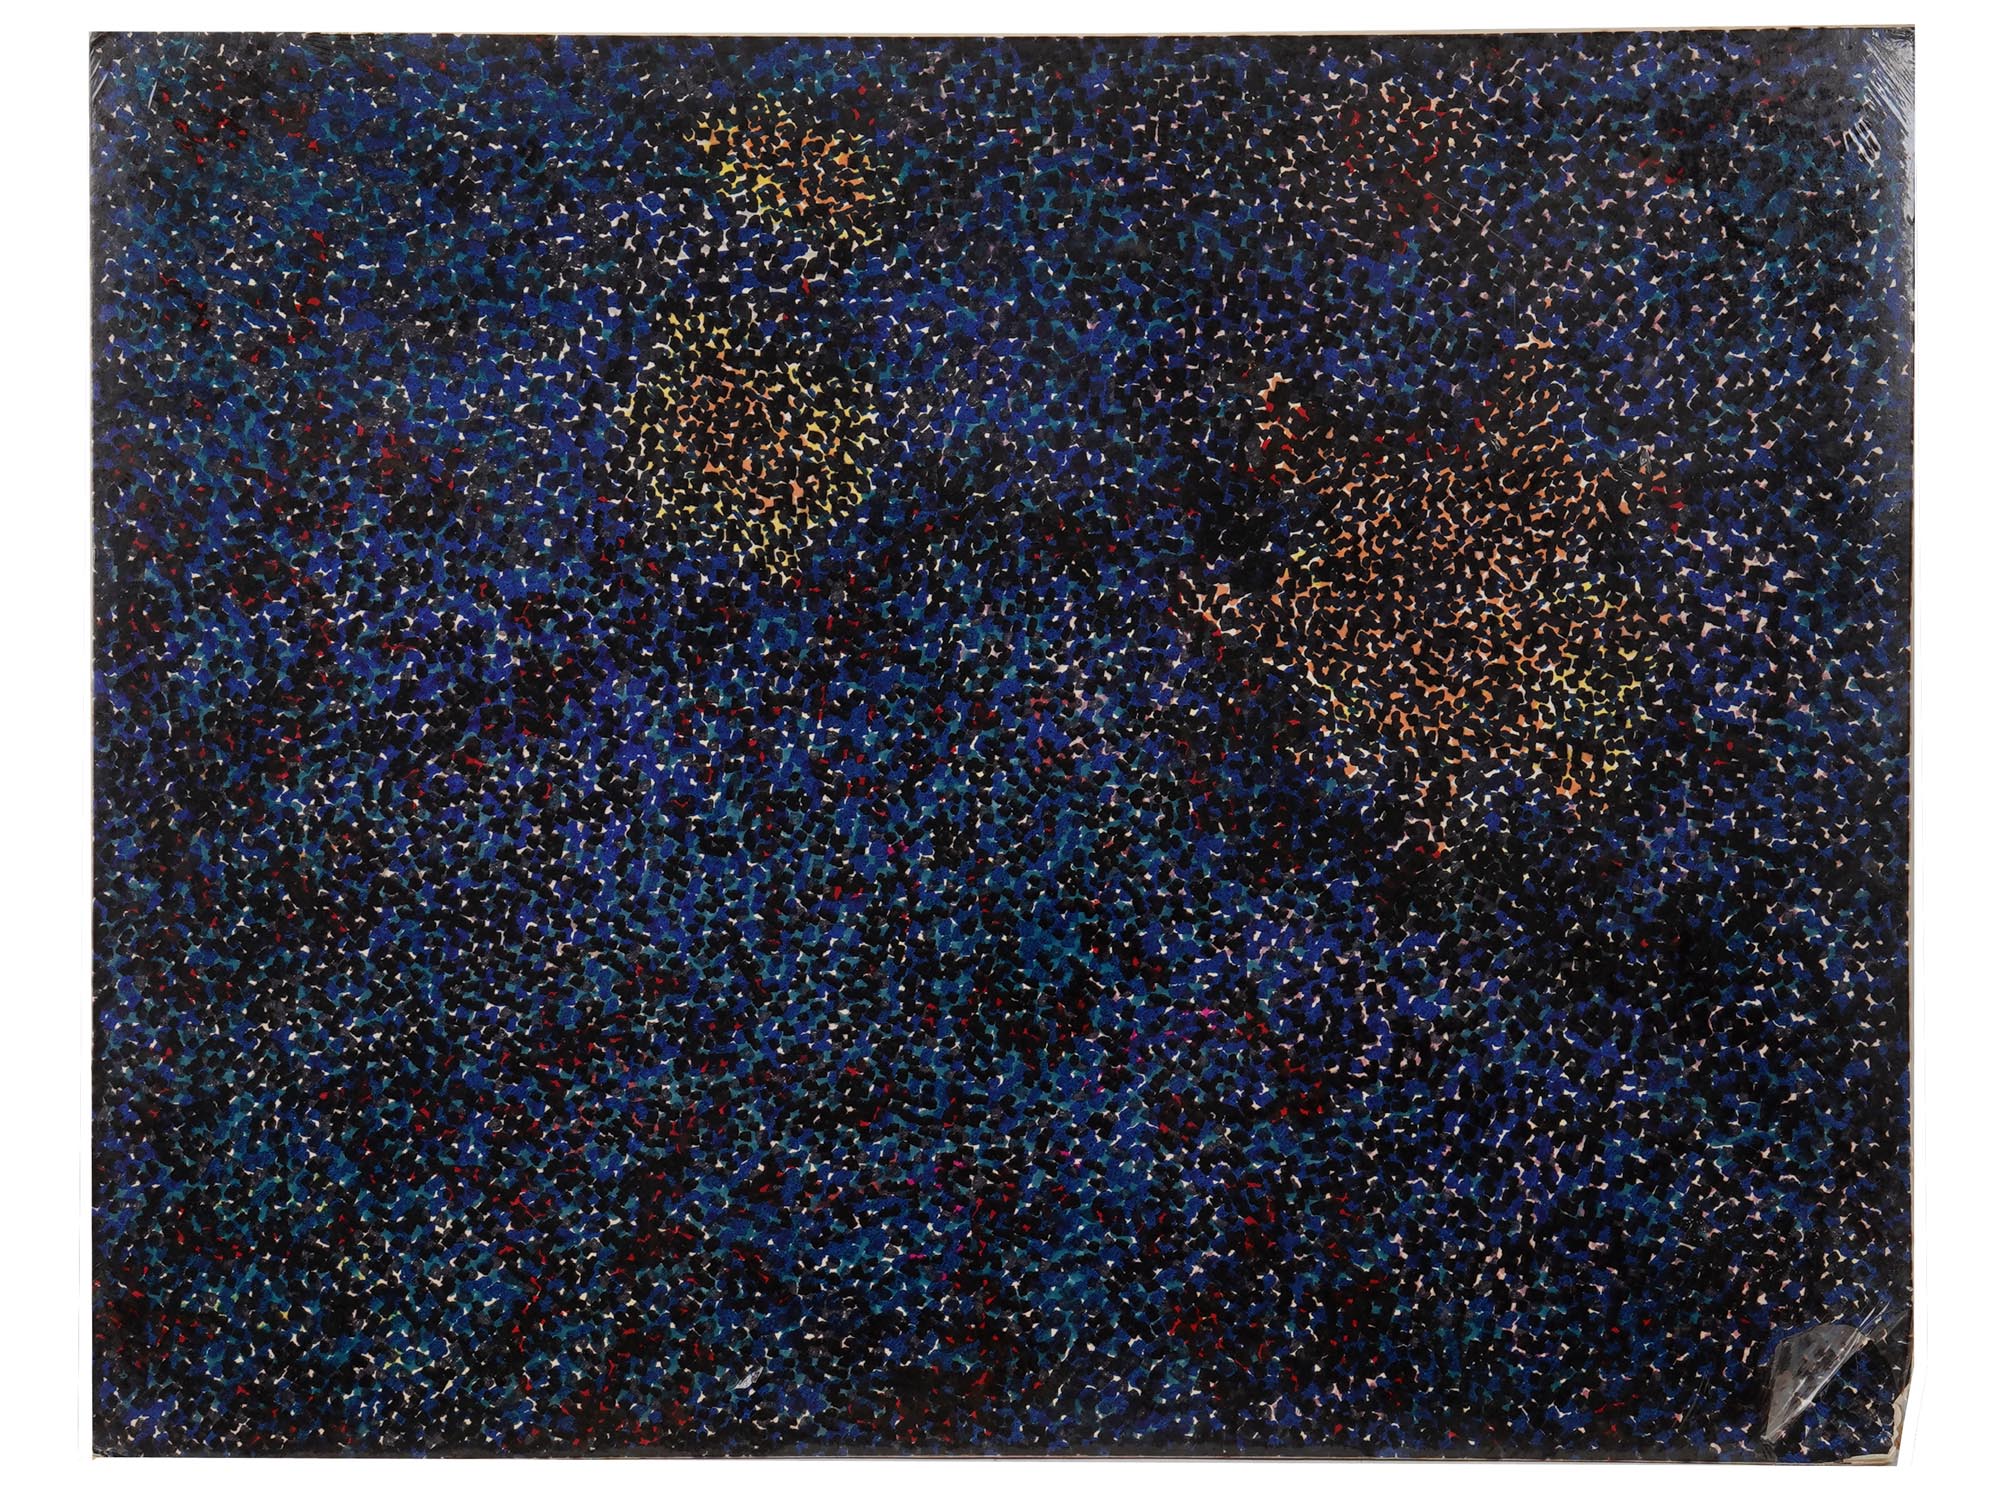 ABSTRACT POINTILLIST PAINTING BY CLAUDE PELIEU PIC-0